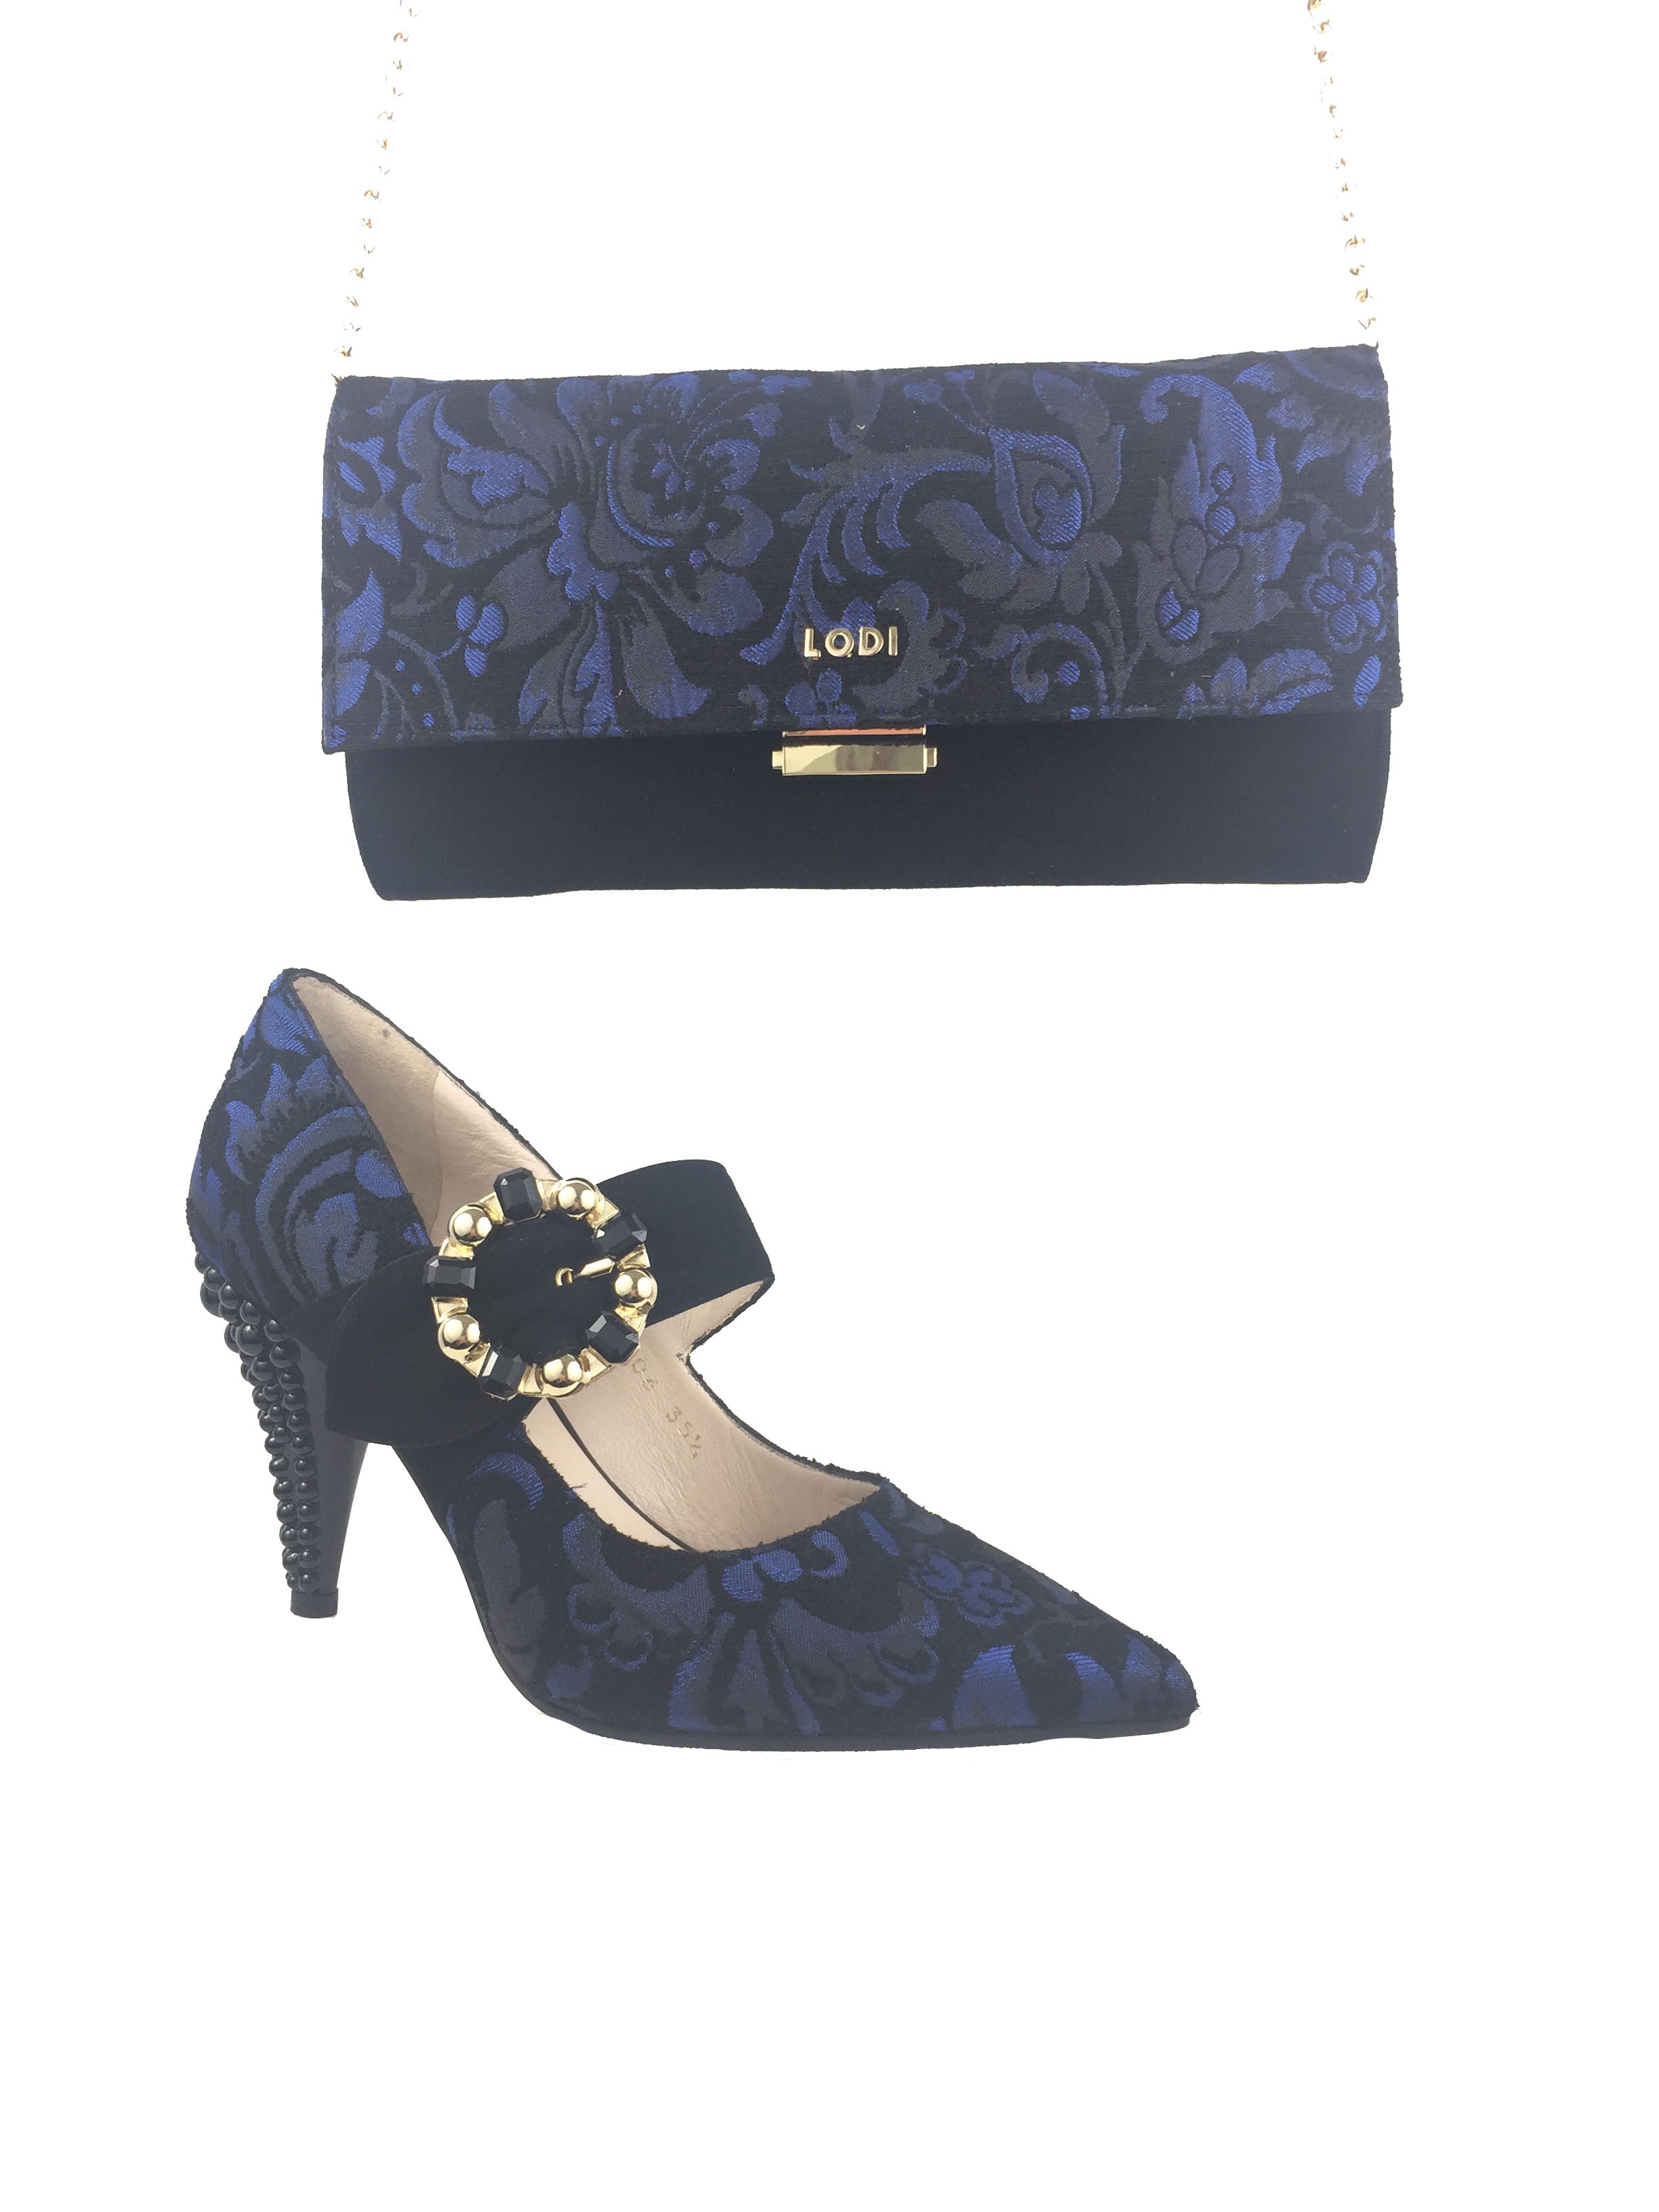 Lodi Black and Blue Gucci Inspired Heels – CHERRYPIC